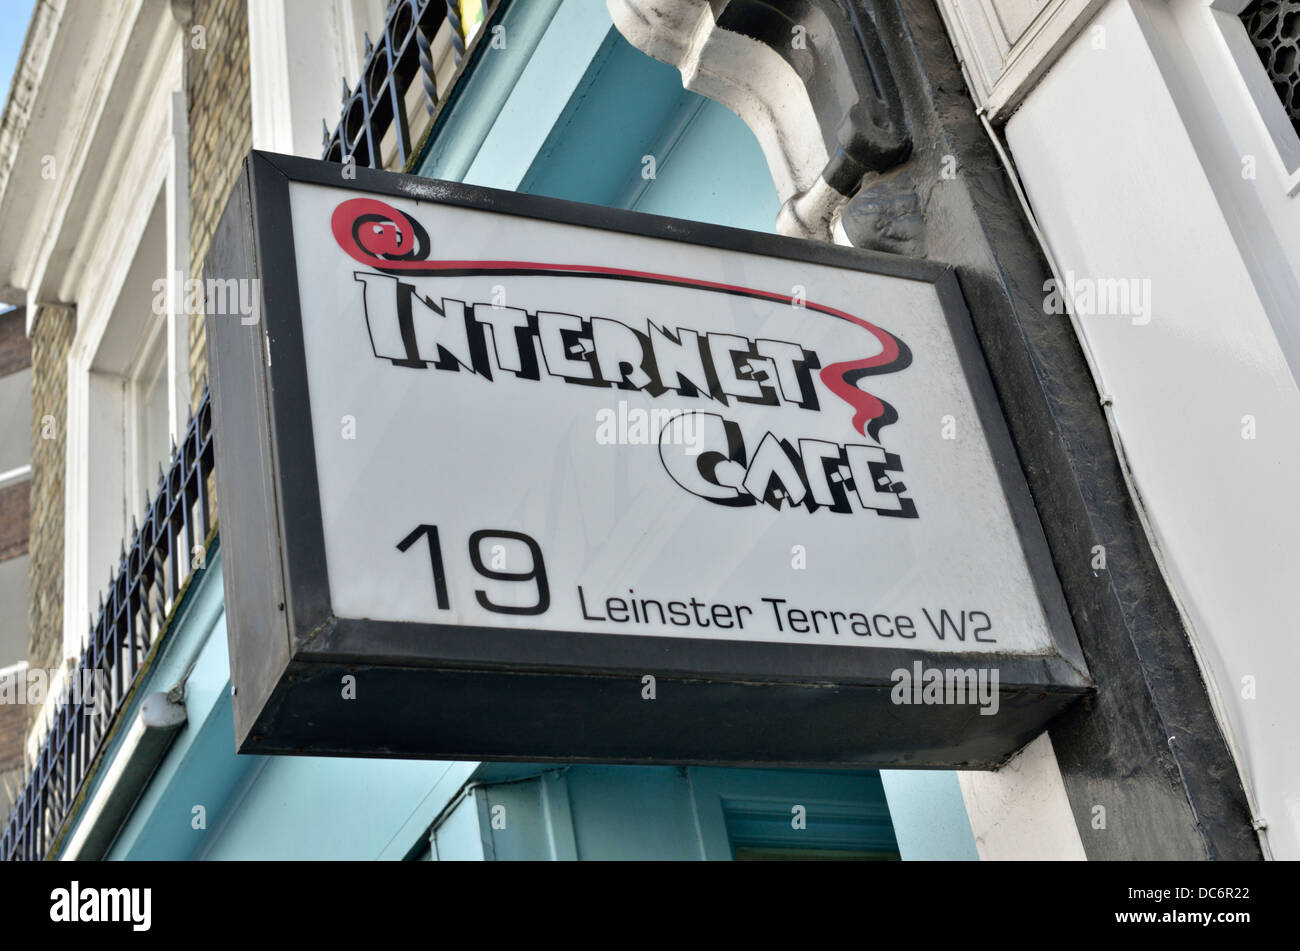 Internet cafe in Leinster Terrace, Bayswater, London, UK. Stock Photo